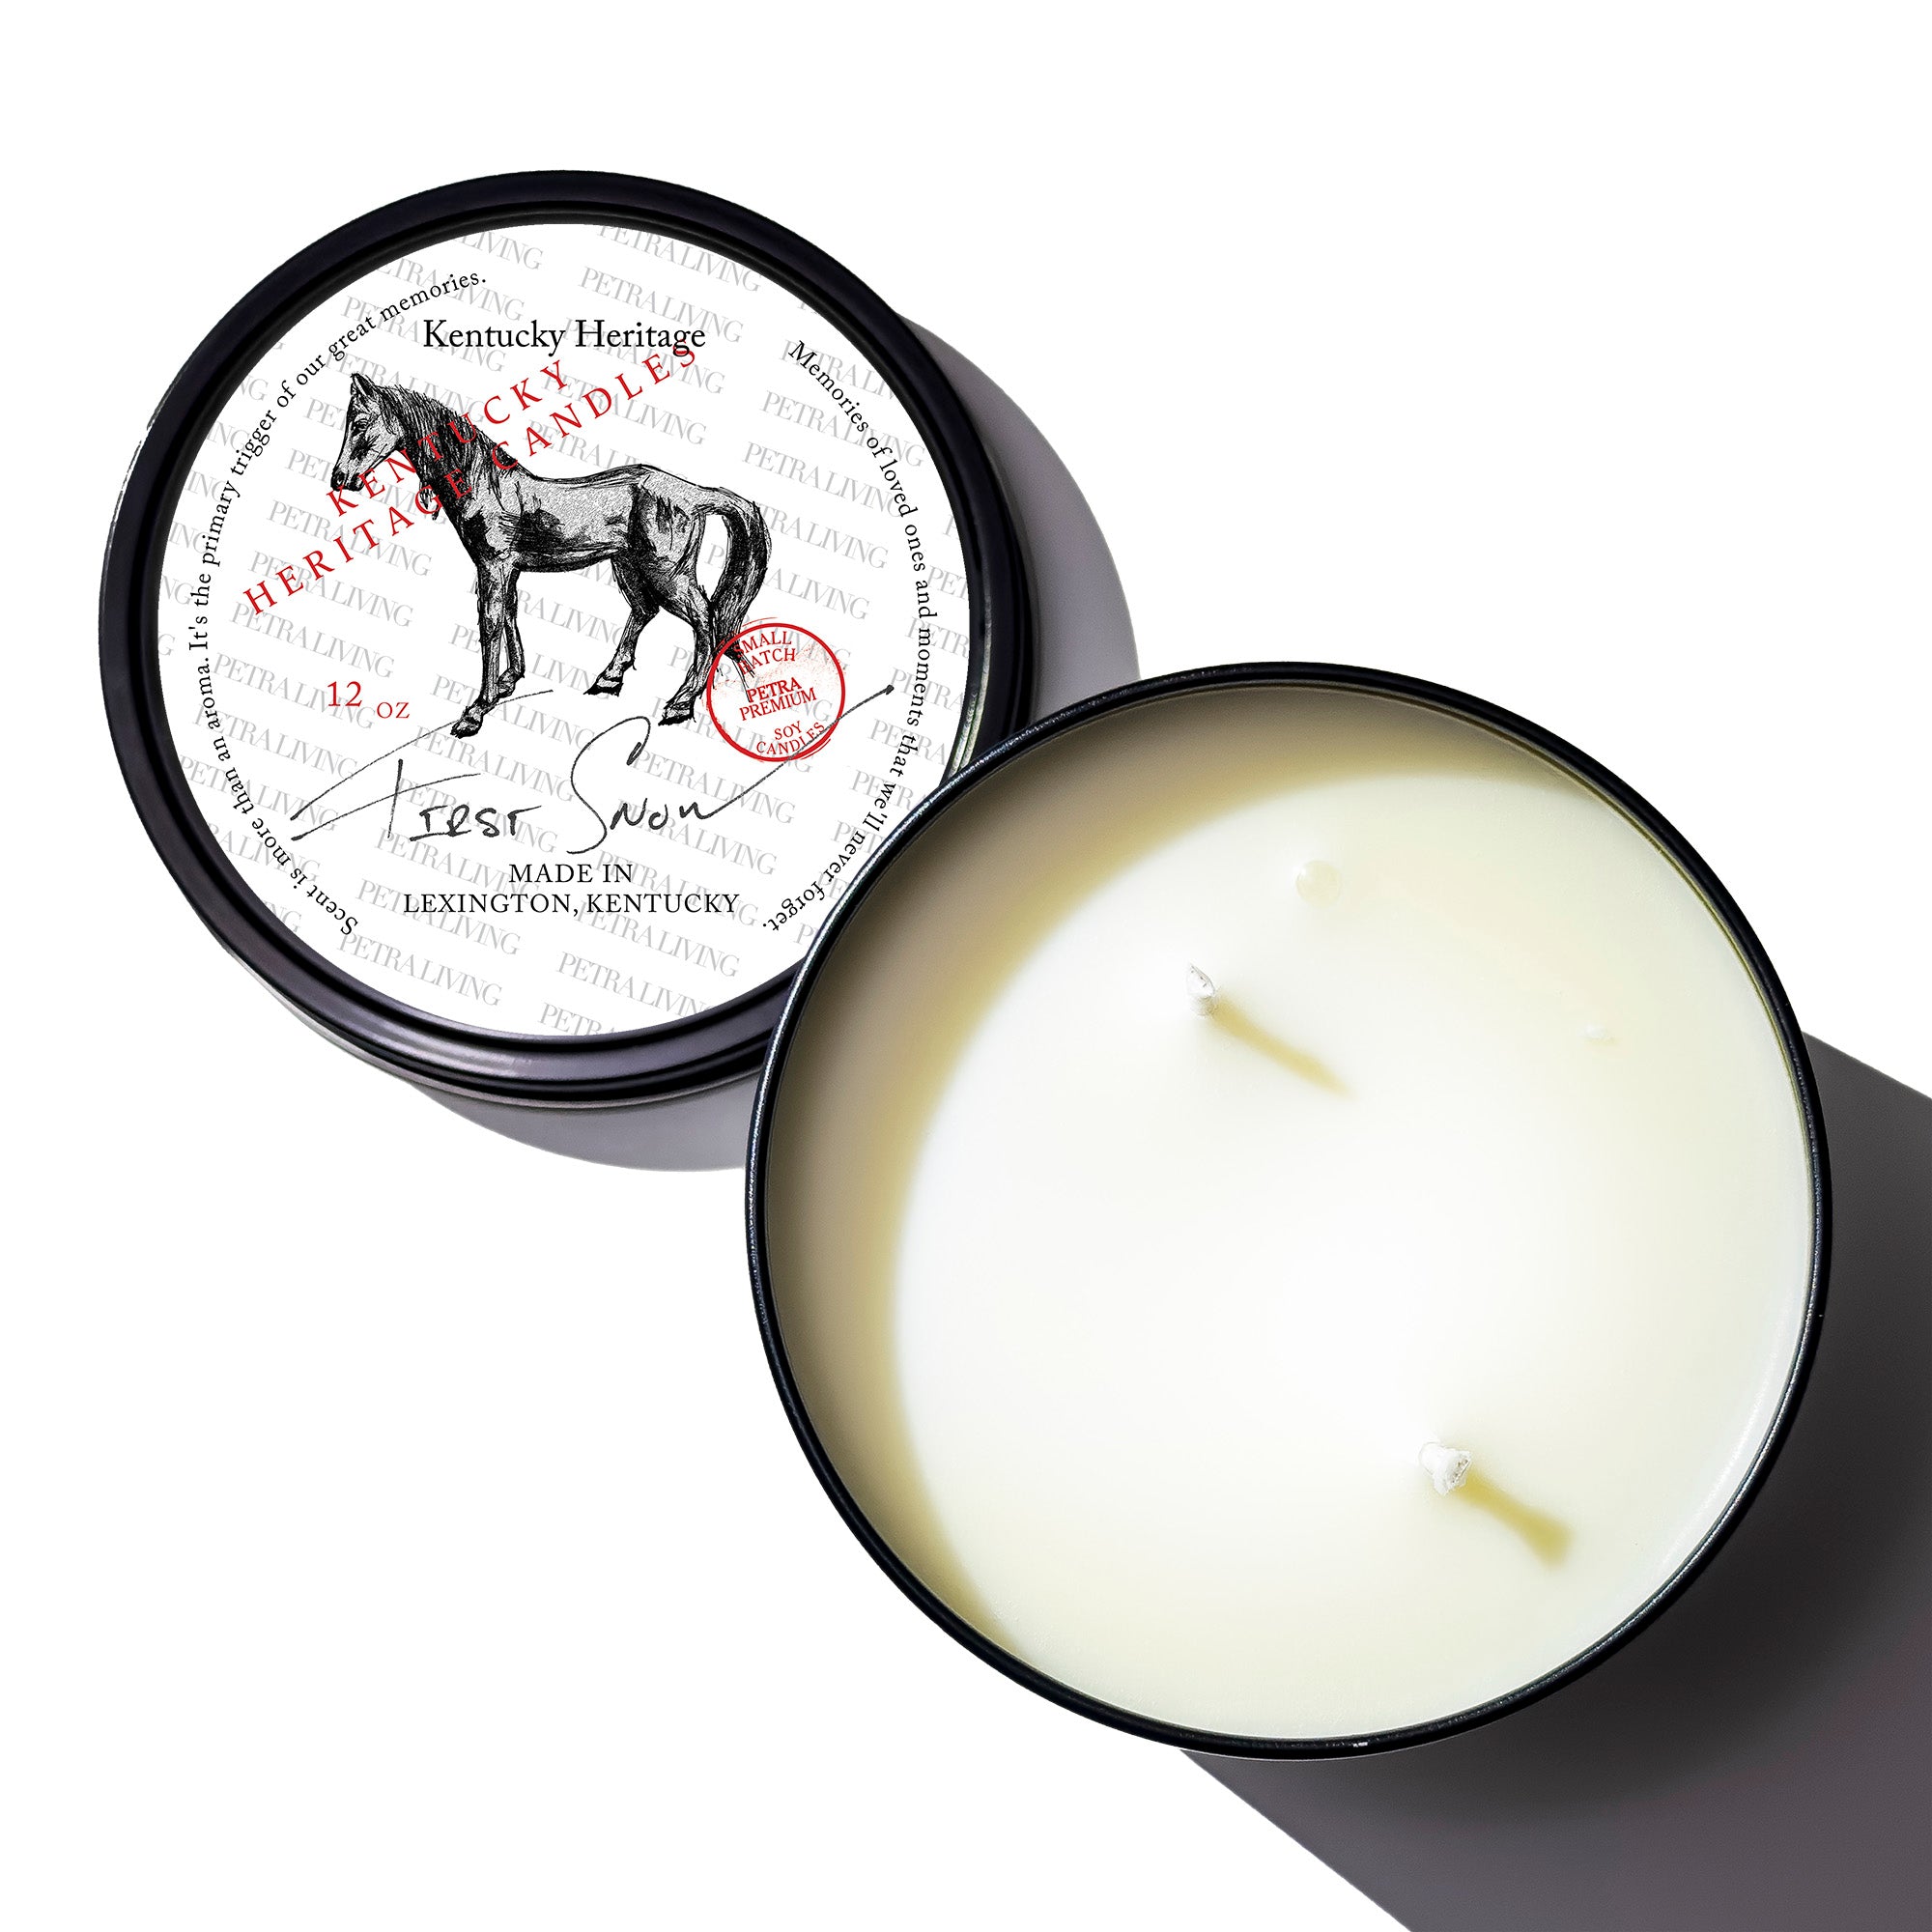 First Snow in Kentucky Heritage Travel Candle